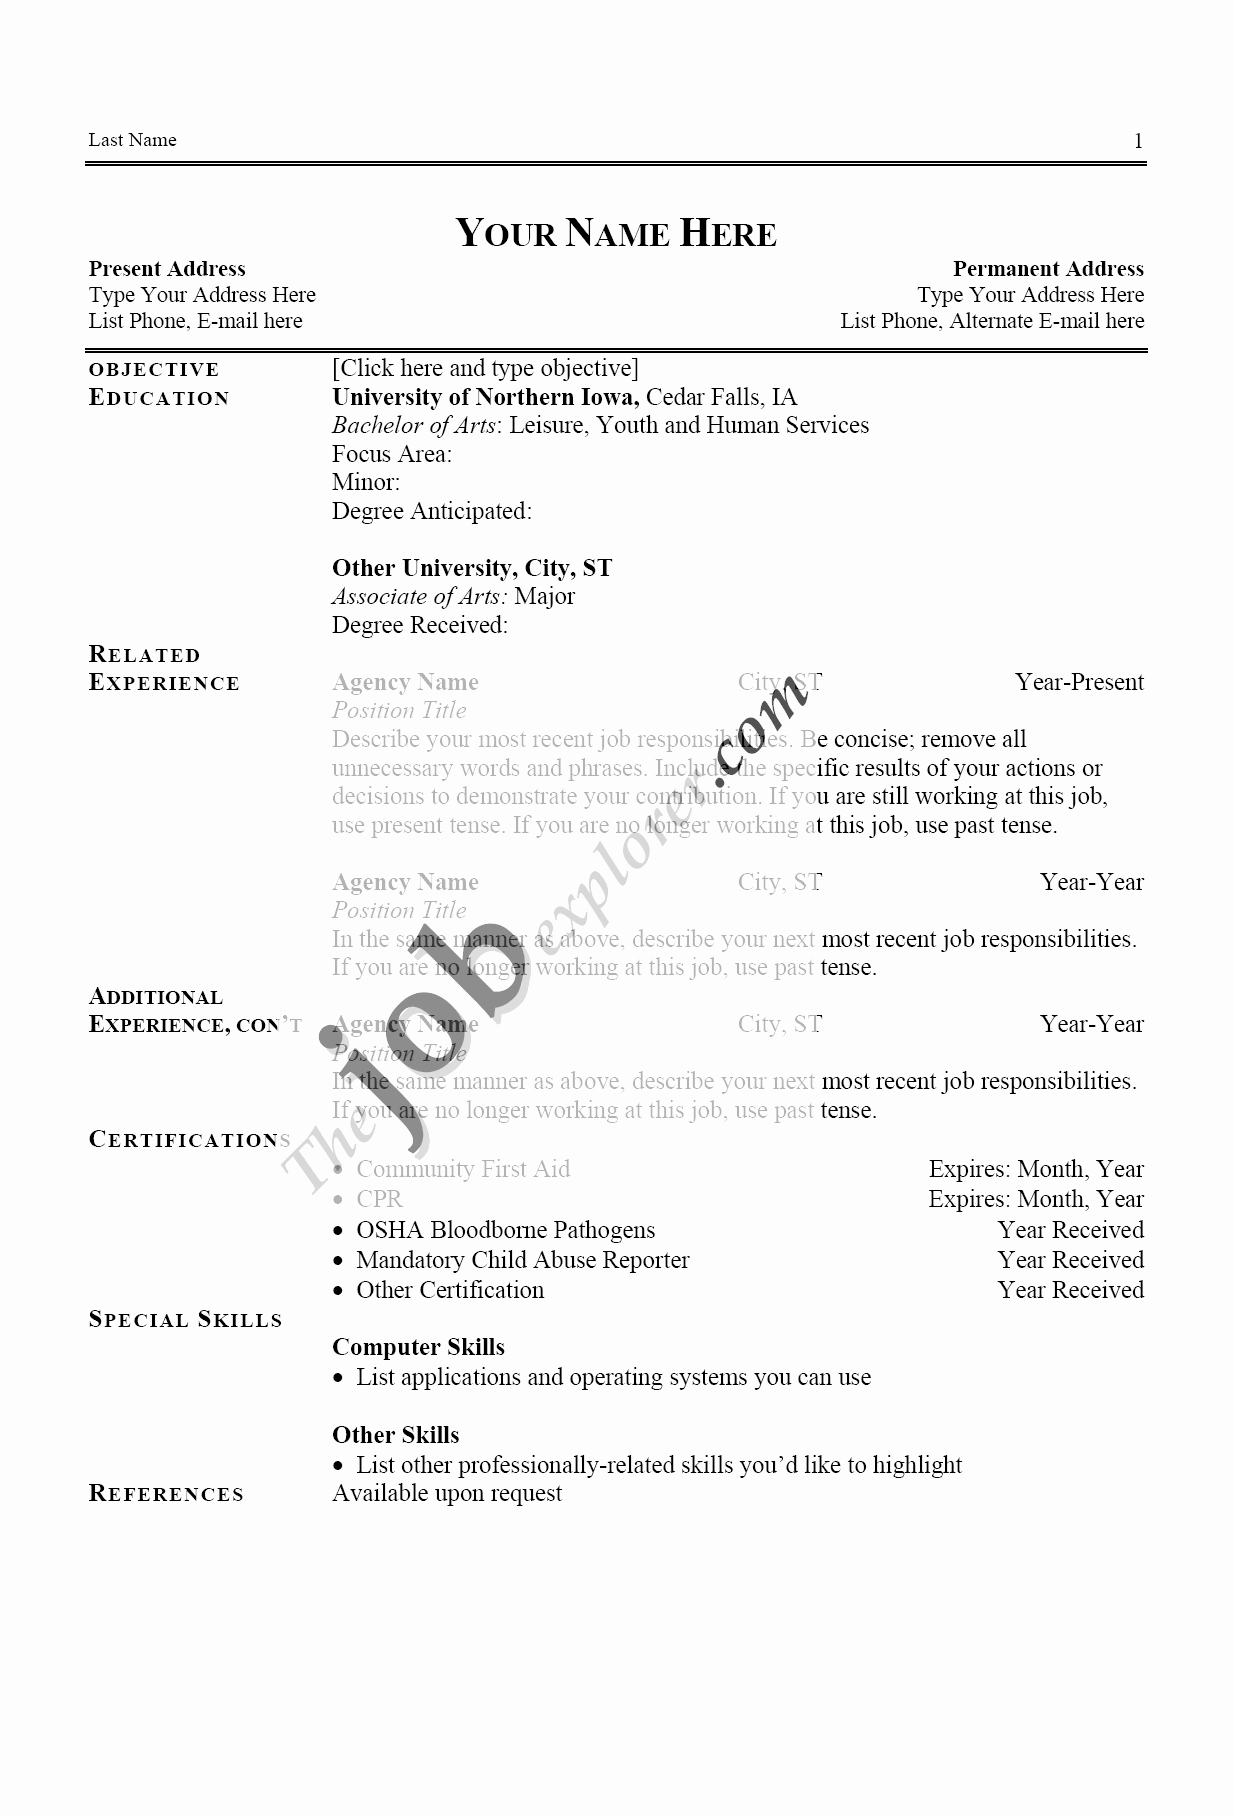 Sample Resume Template Free Resume Examples with Resume